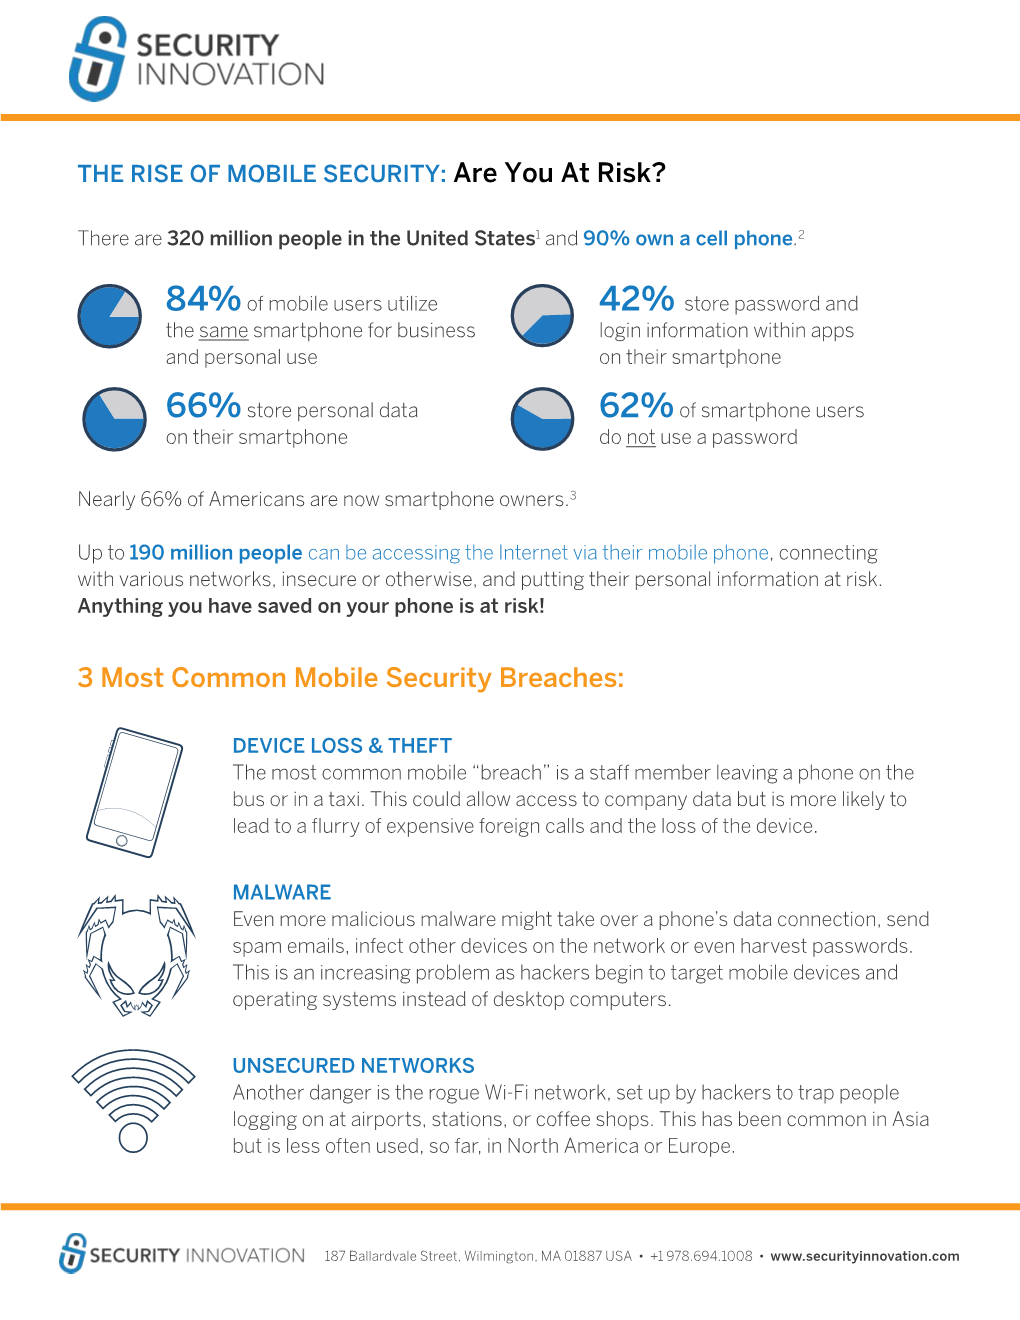 MOBILE SECURITY: Are You at Risk?